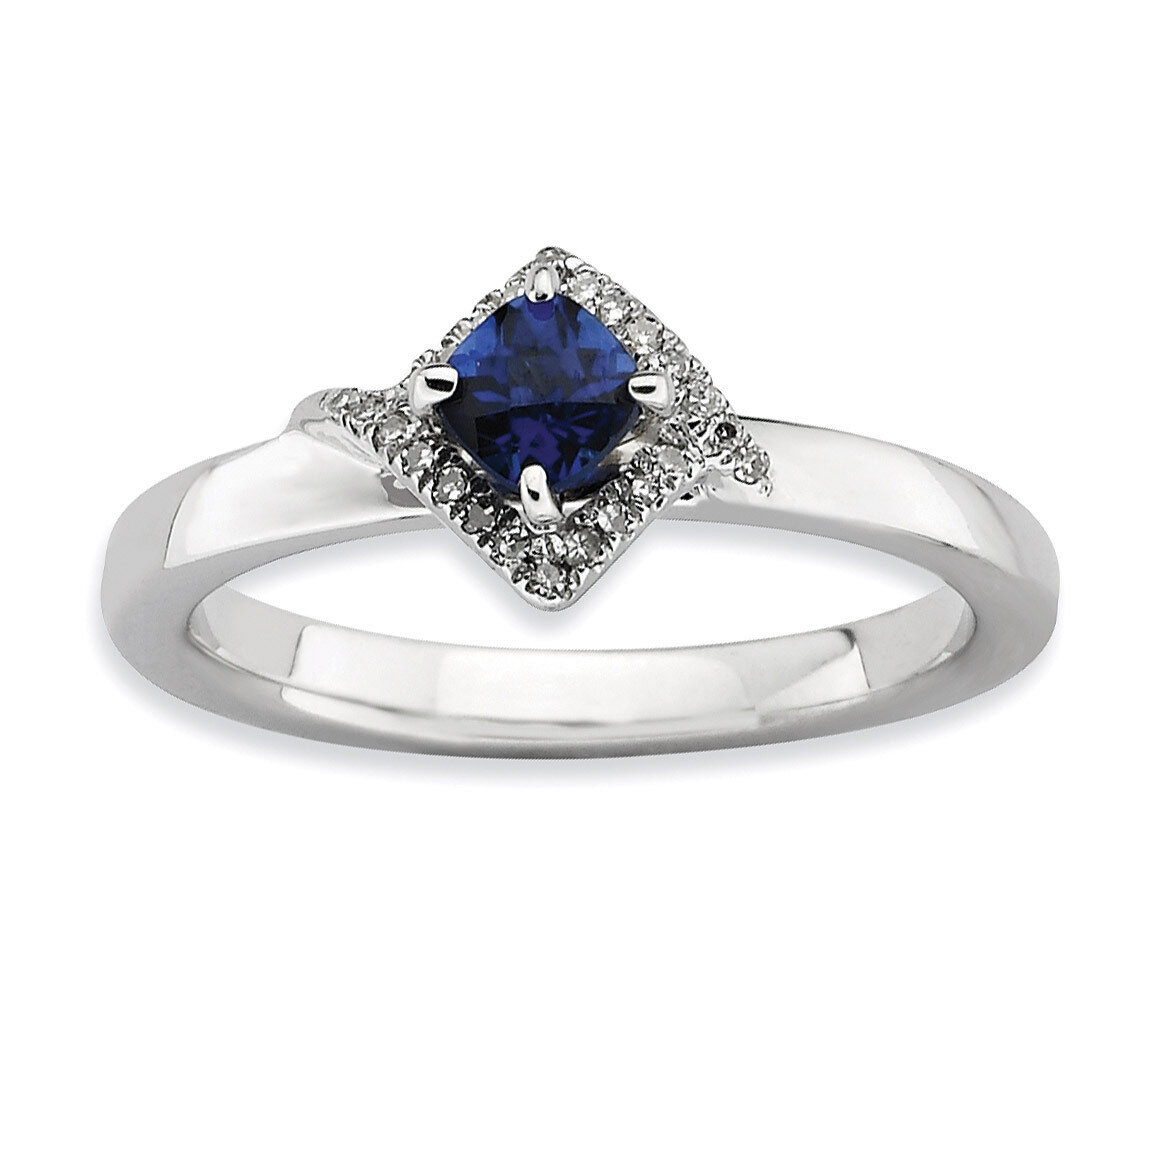 Sapphire & Diamond Ring - Sterling Silver Polished QSK649